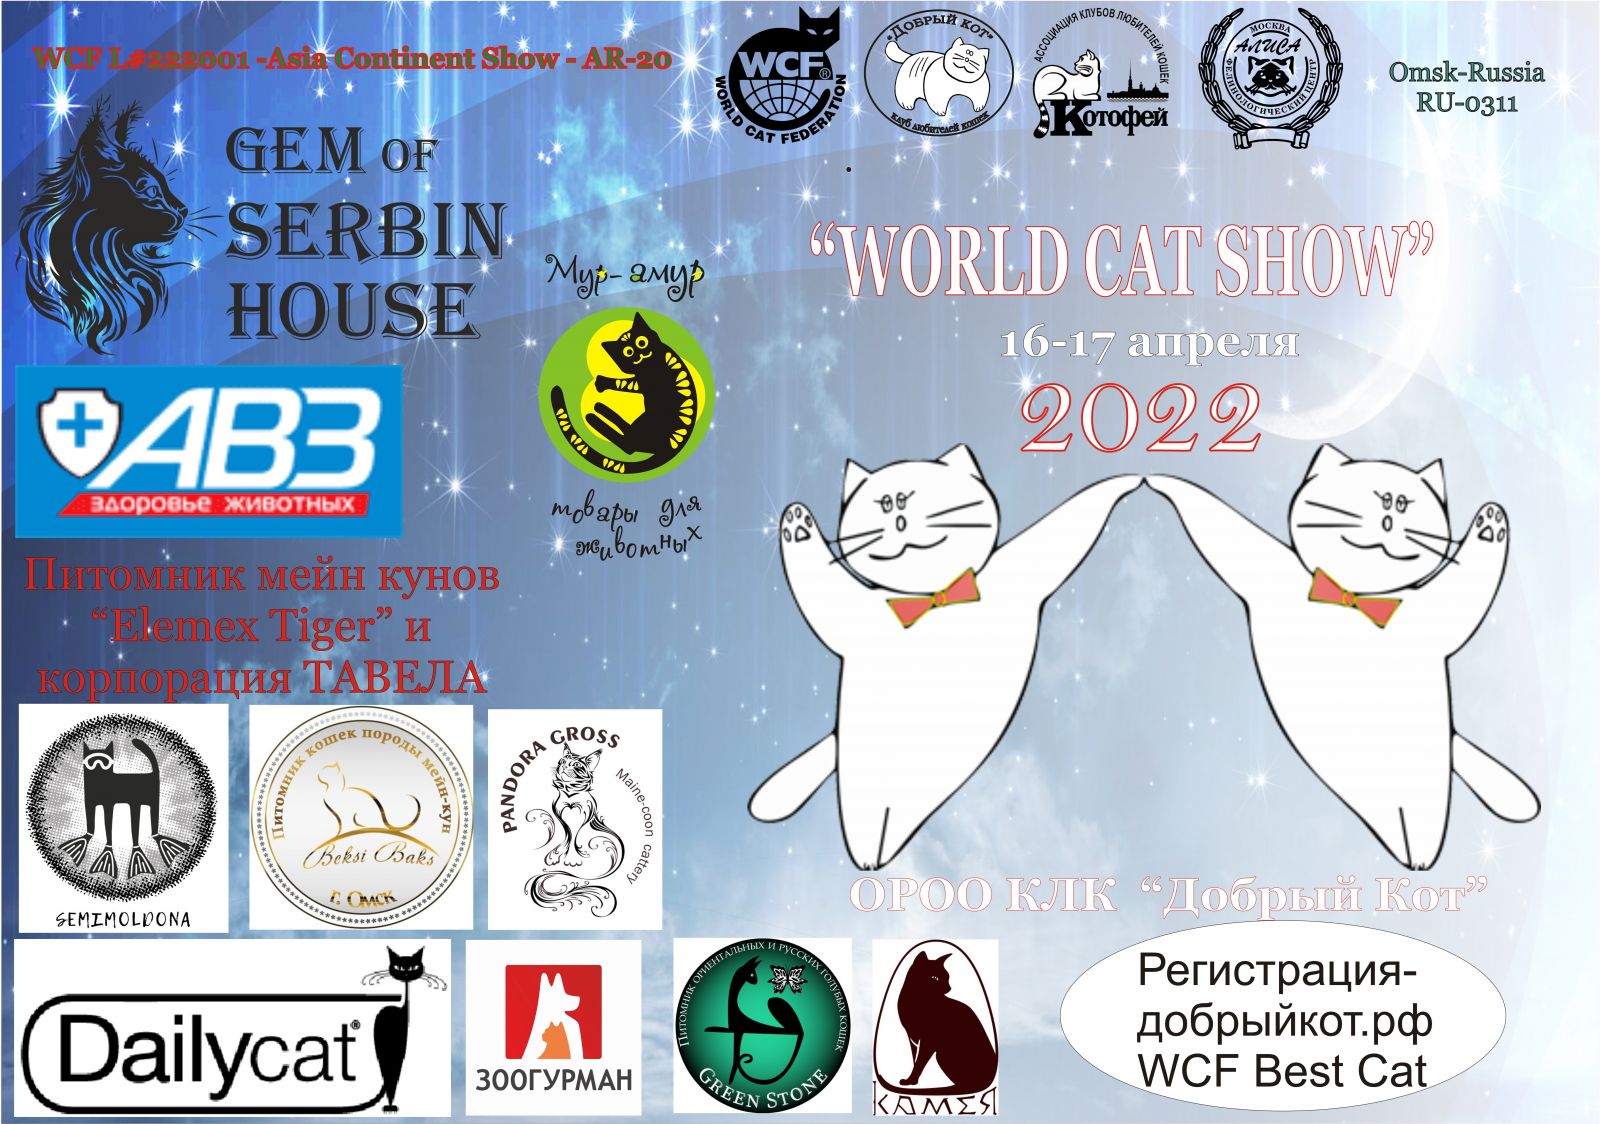 16-17 aprile 2022 World Cat Show Omsk Russia